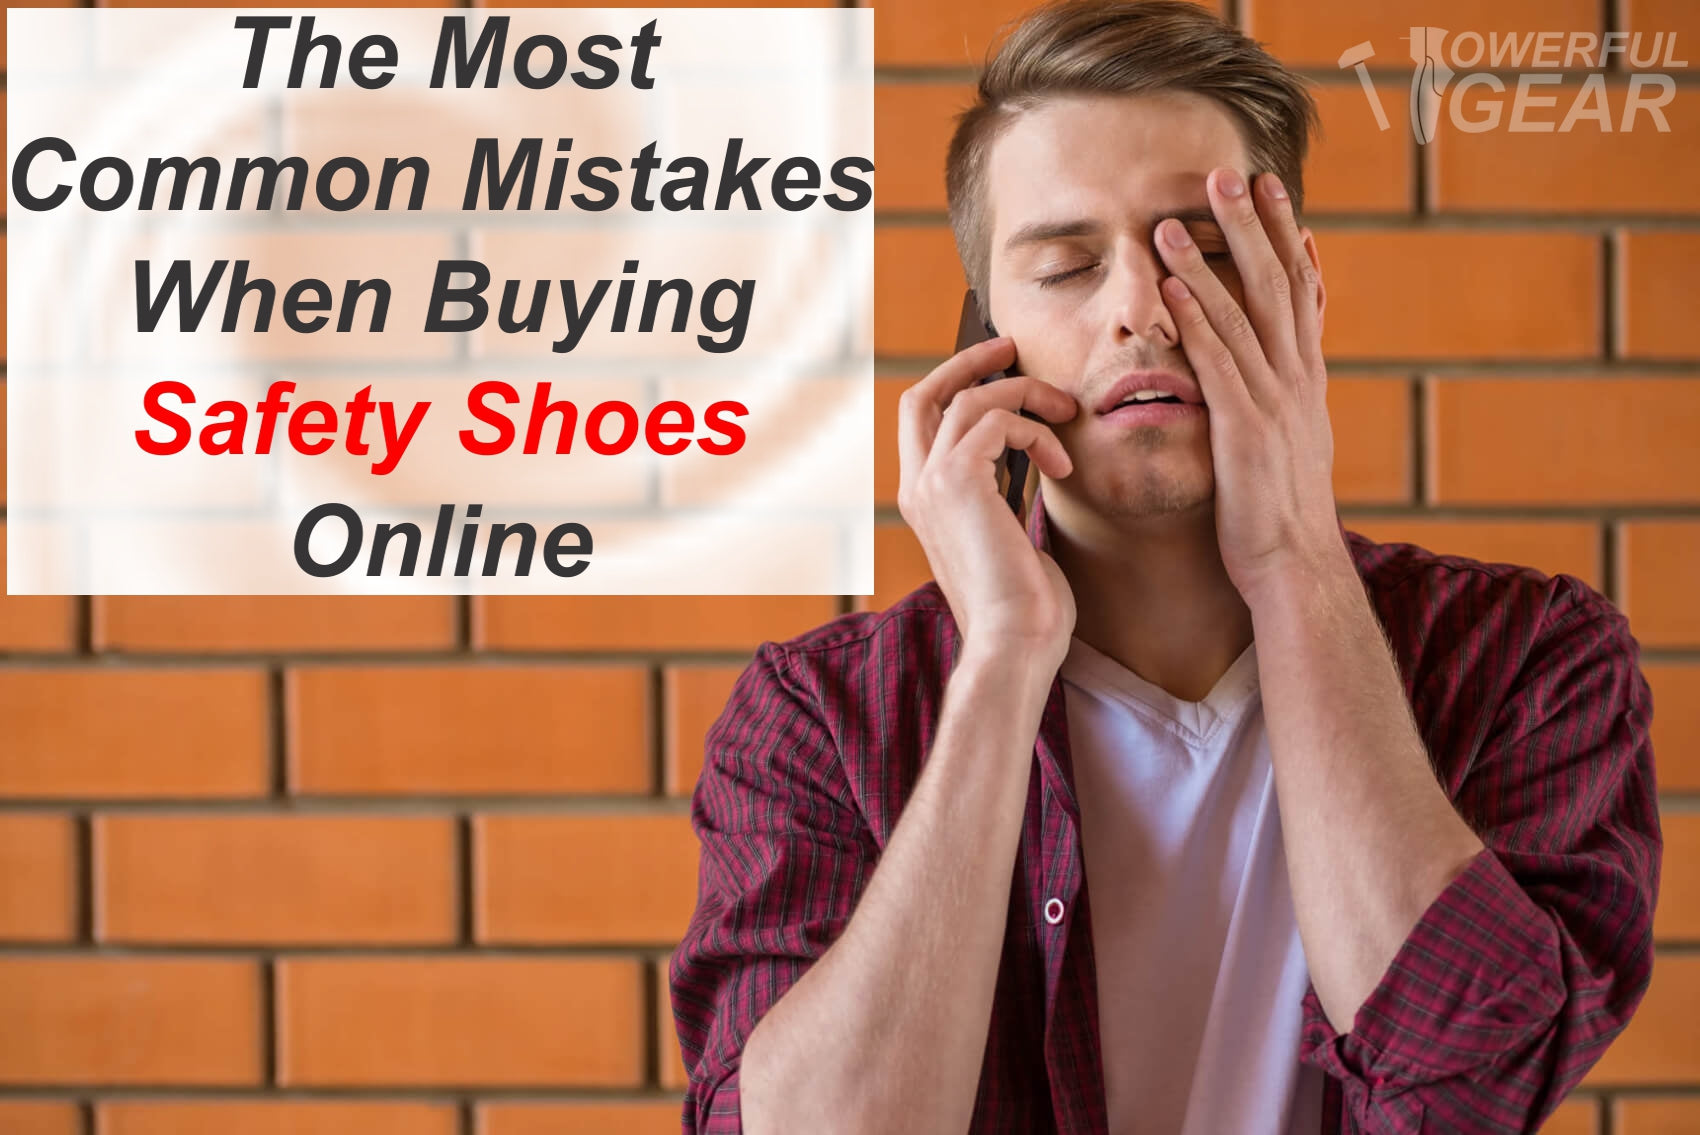 The Most Common Mistakes When Buying Safety Shoes Online